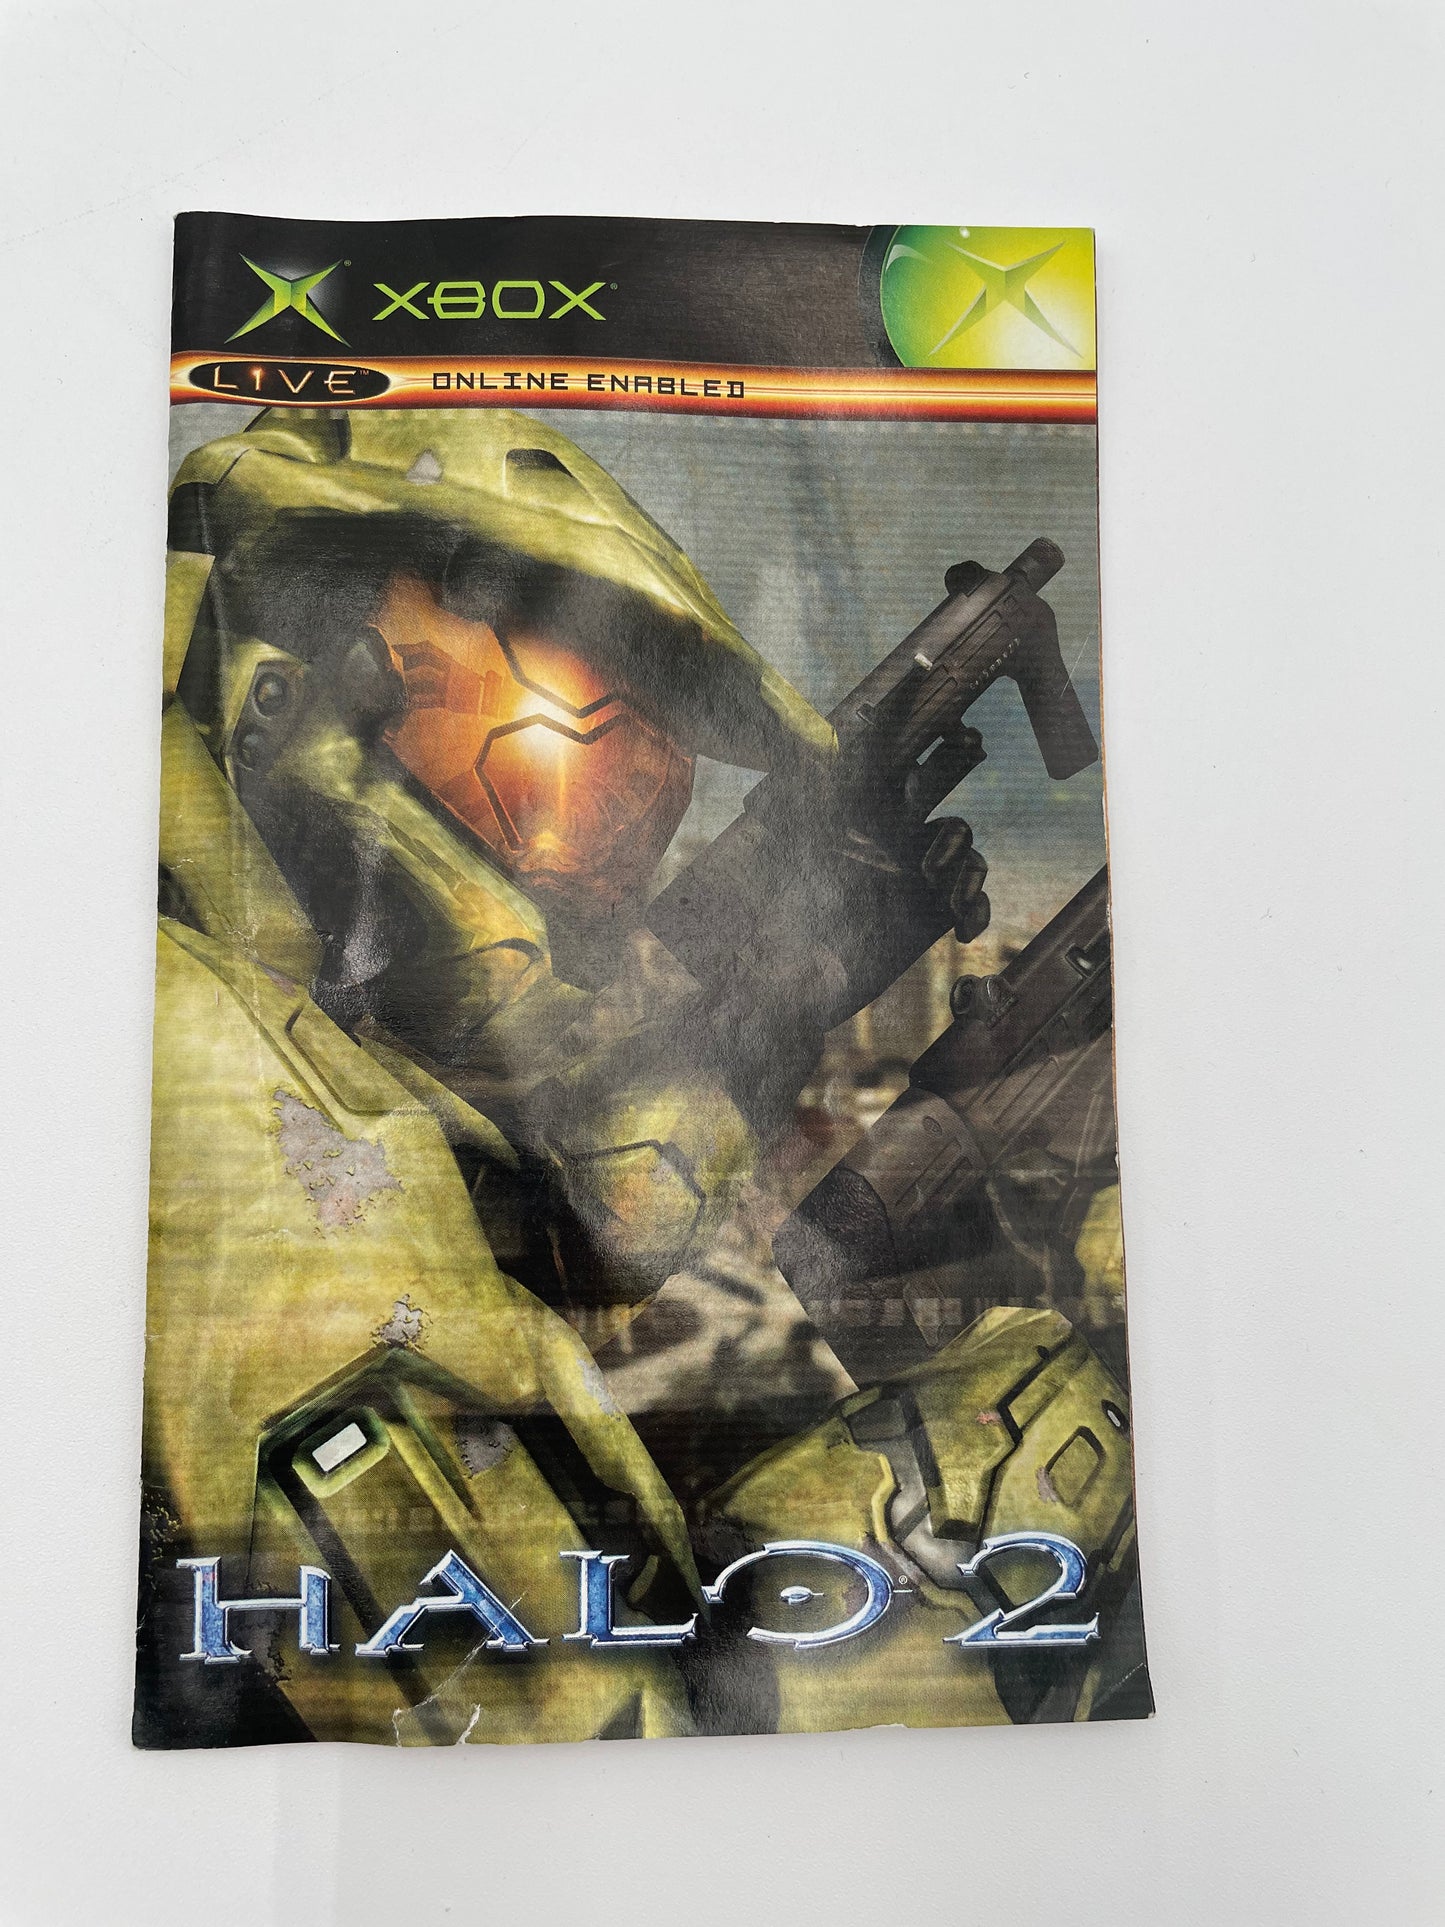 Halo 2 - XBox - Multi-Player Map Pack w/ Insert 2005 #103771-1